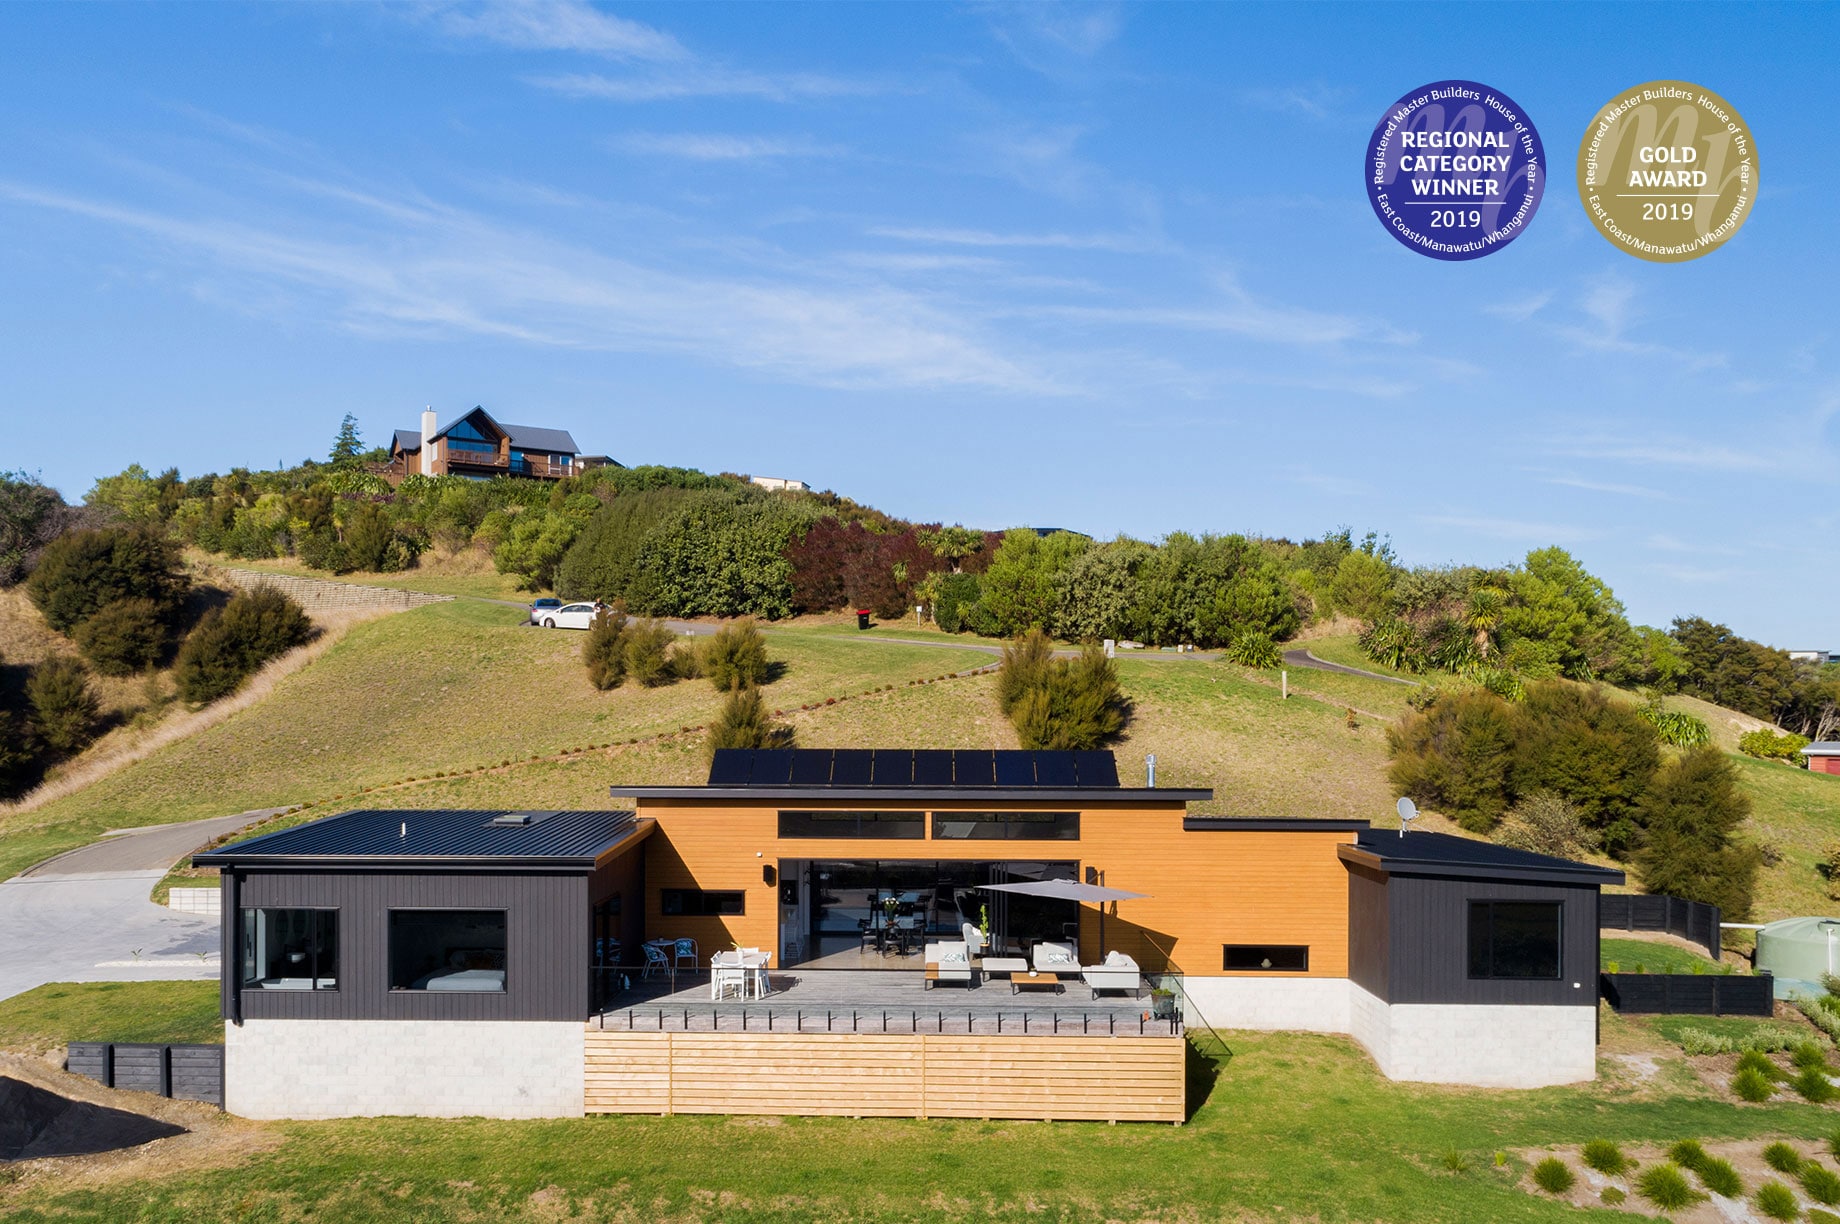 Elevated view of an award winning rural house